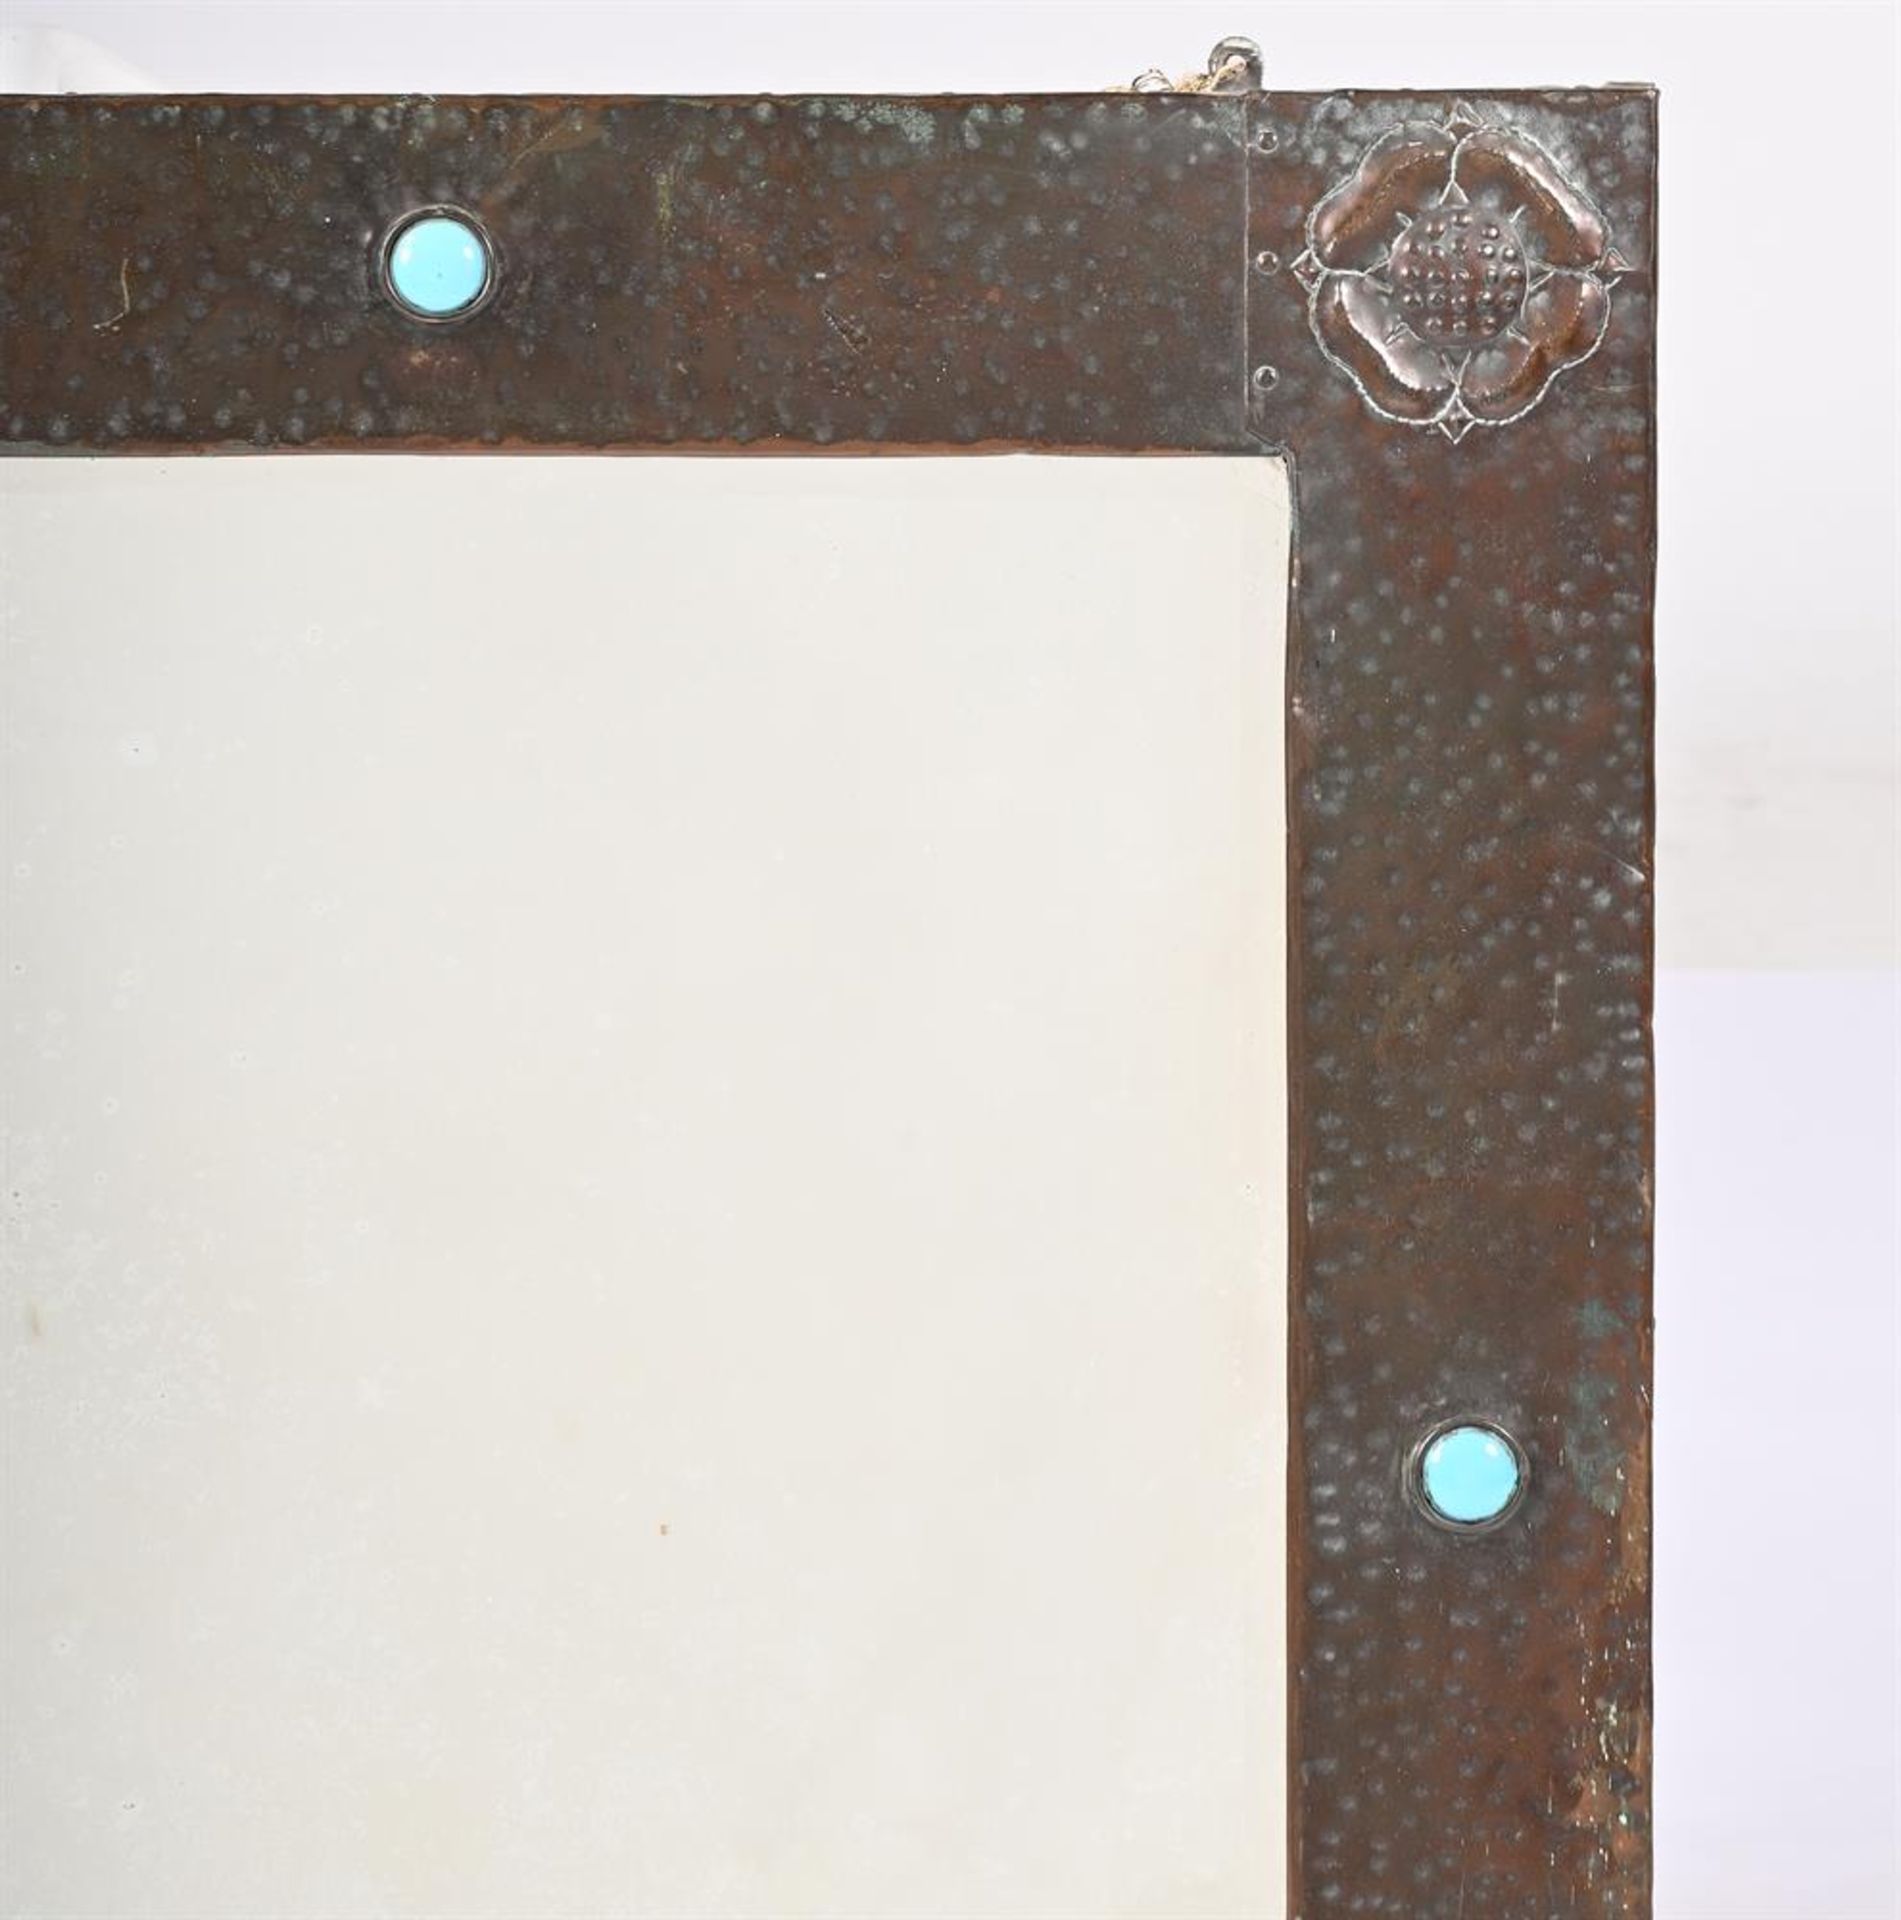 AN ARTS AND CRAFTS HAMMERED COPPER AND TURQUOISE ENAMEL WALL MIRROR, BY LIBERTY & CO - Image 3 of 4